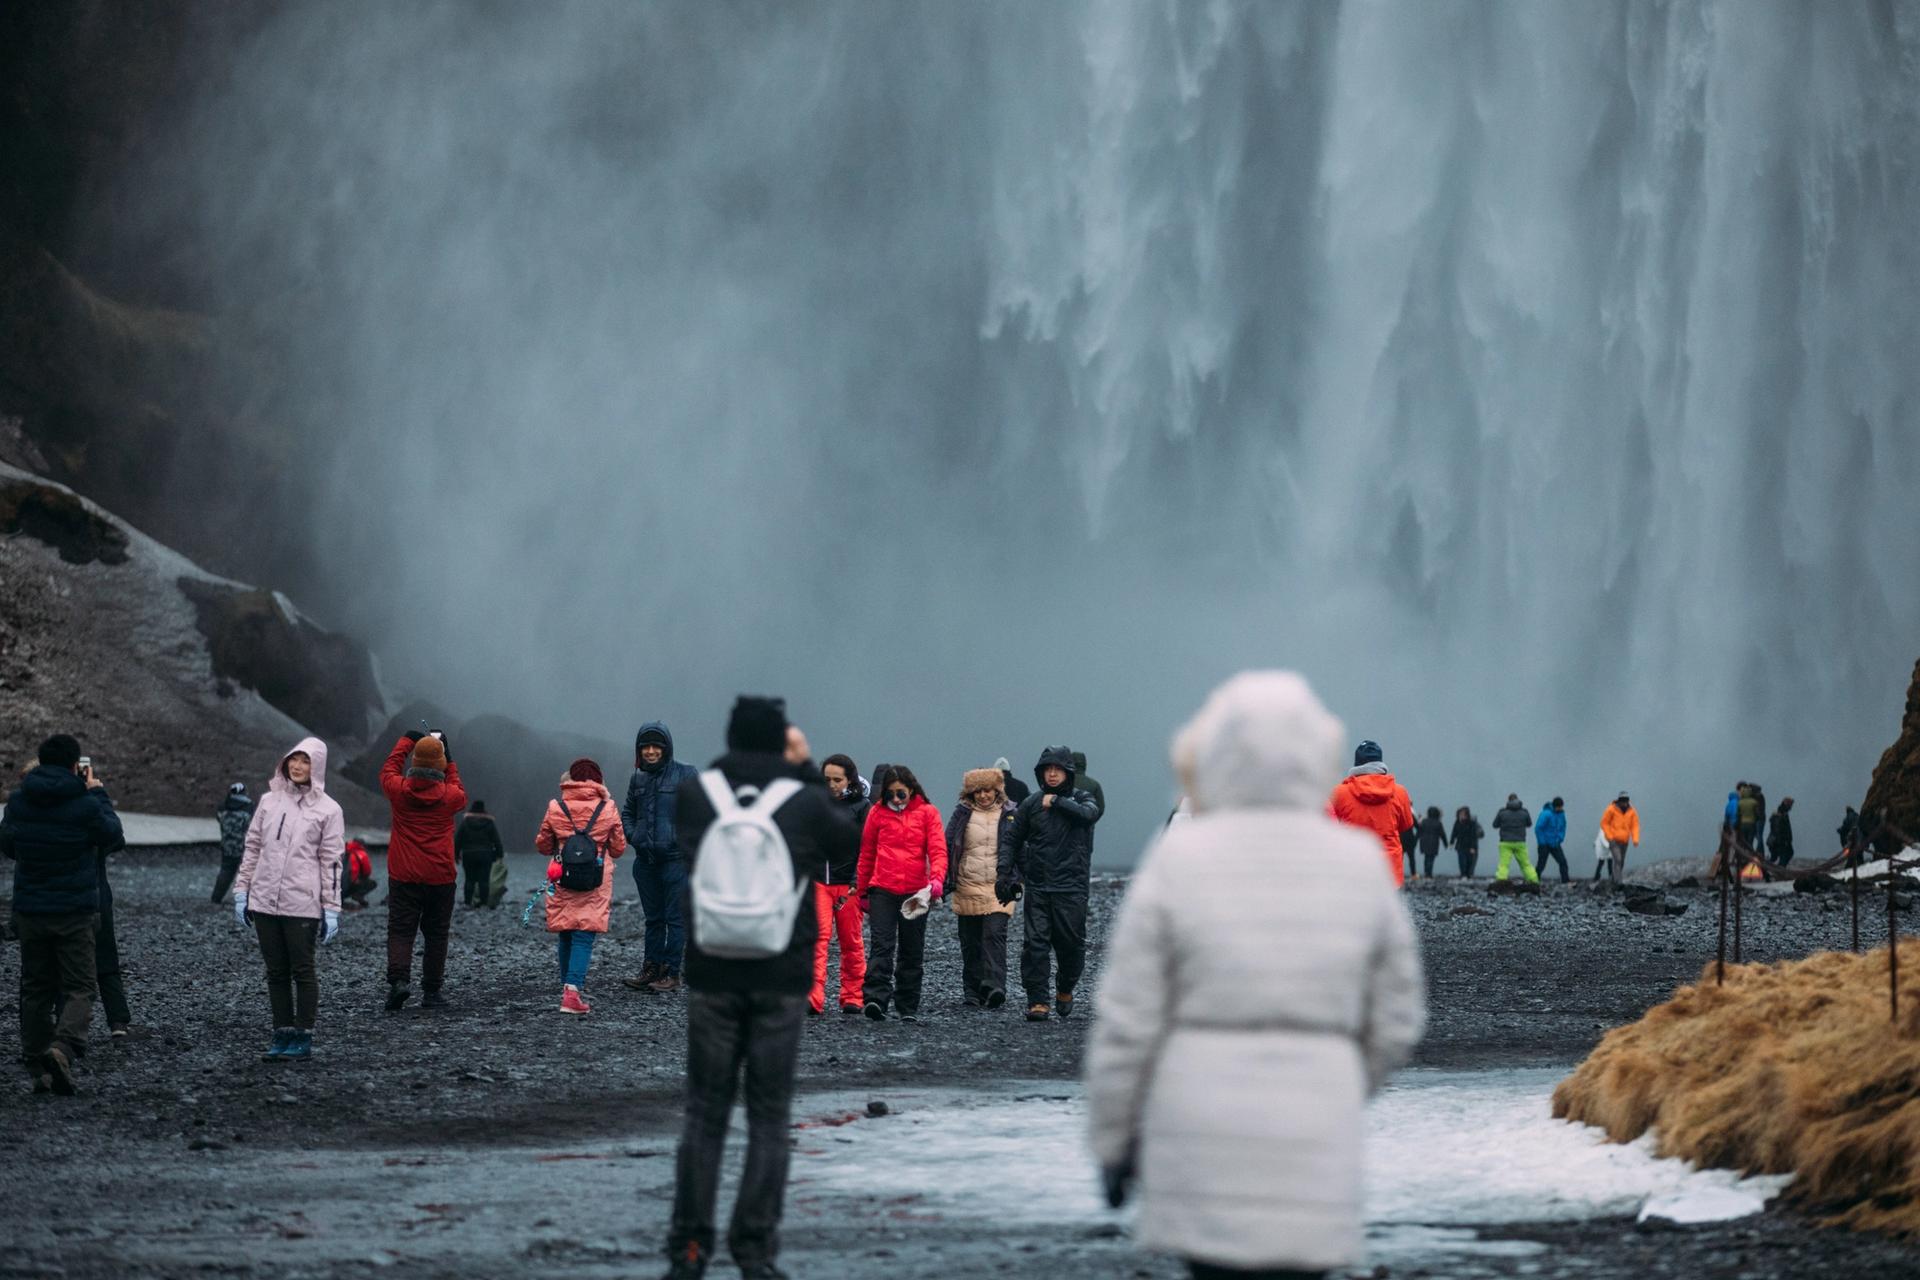 around 50 tourists in Iceland watching a waterfall